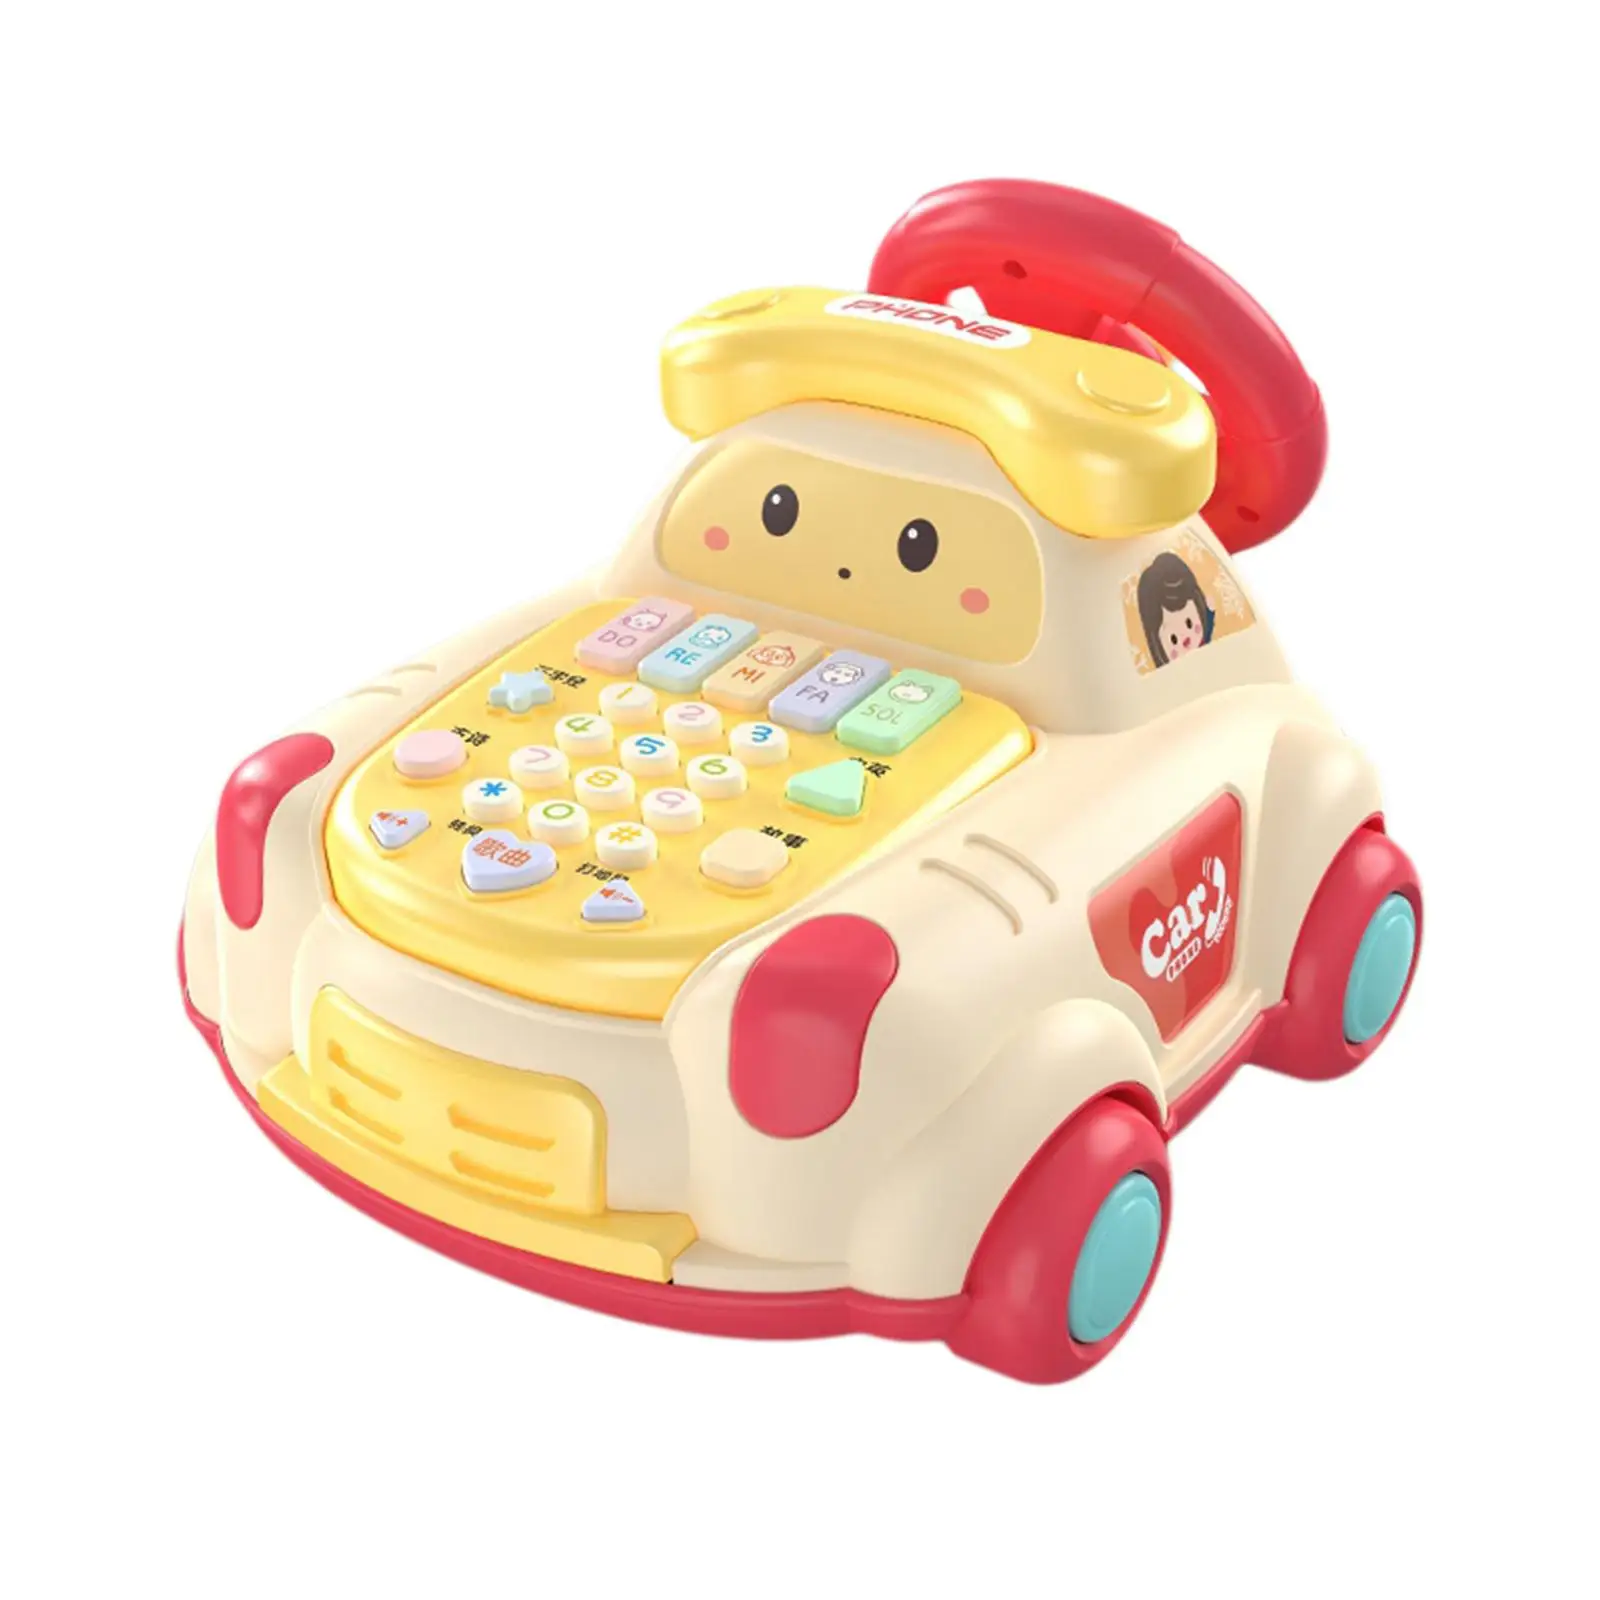 Baby Musical Toys Car Pretend Play musical toddlers Steering Wheel Car for Game Preschool Interaction Learning Development